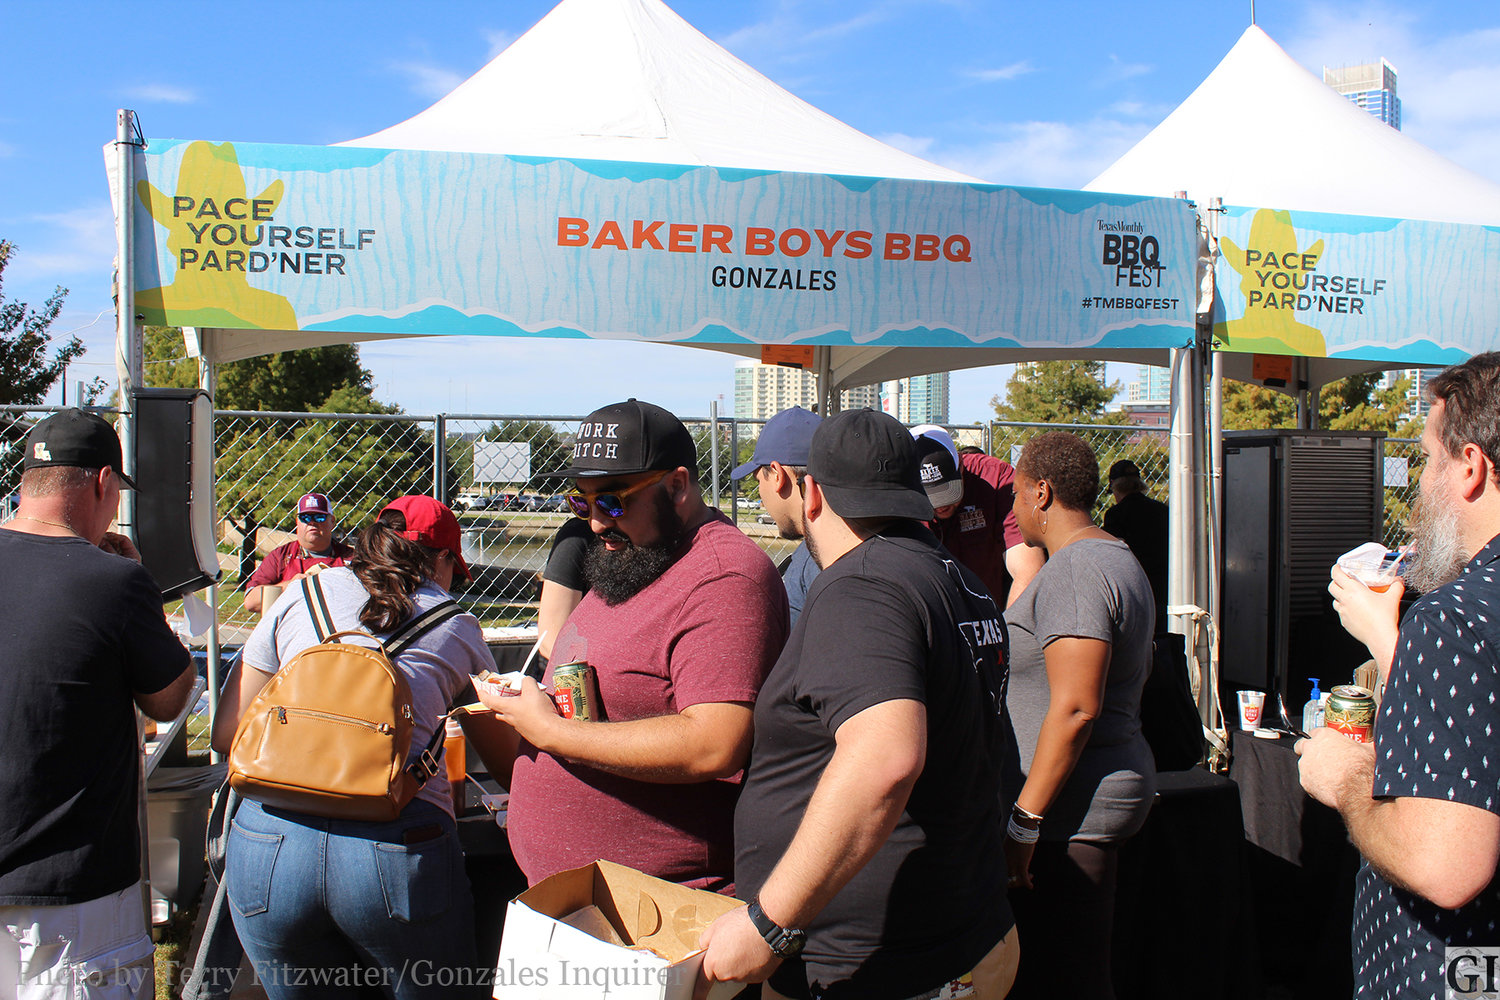 Spectators from all over Texas flocked to the Gonzales’ Baker Boys Barbecue on Sunday at the Austin BBQ Fest to sample turkey, sausage and rice.